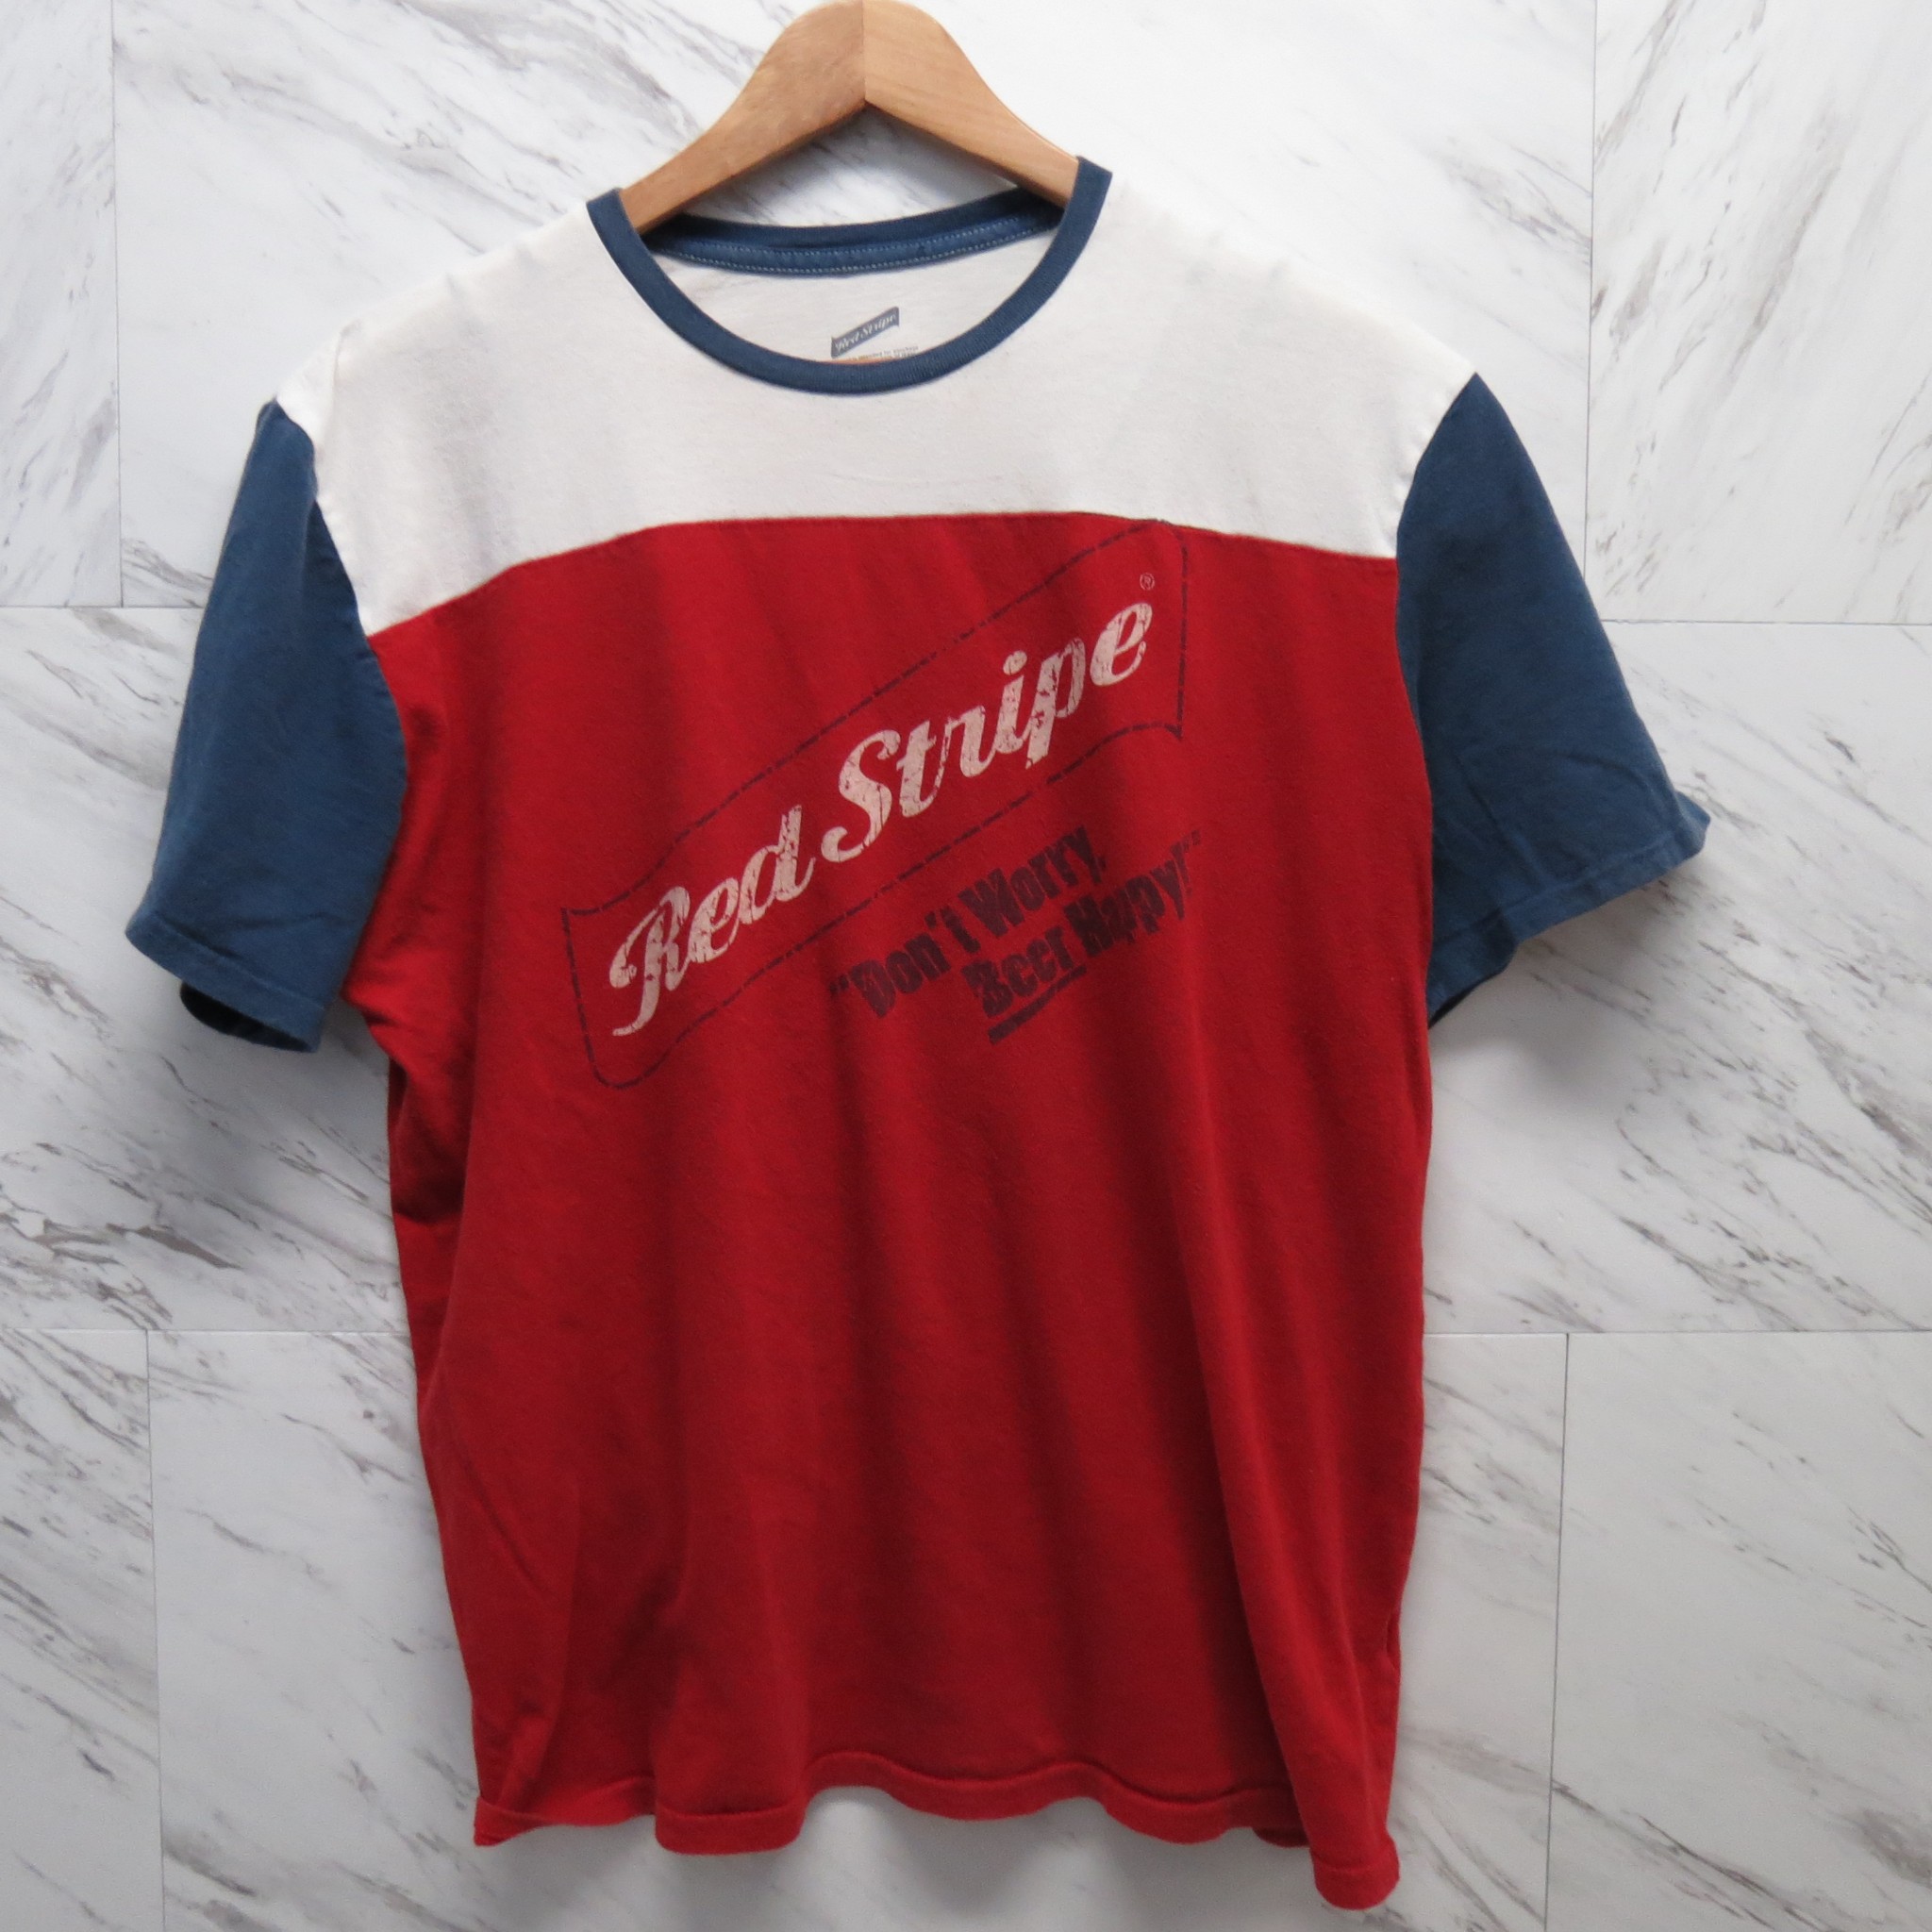 red stripe beer t shirt